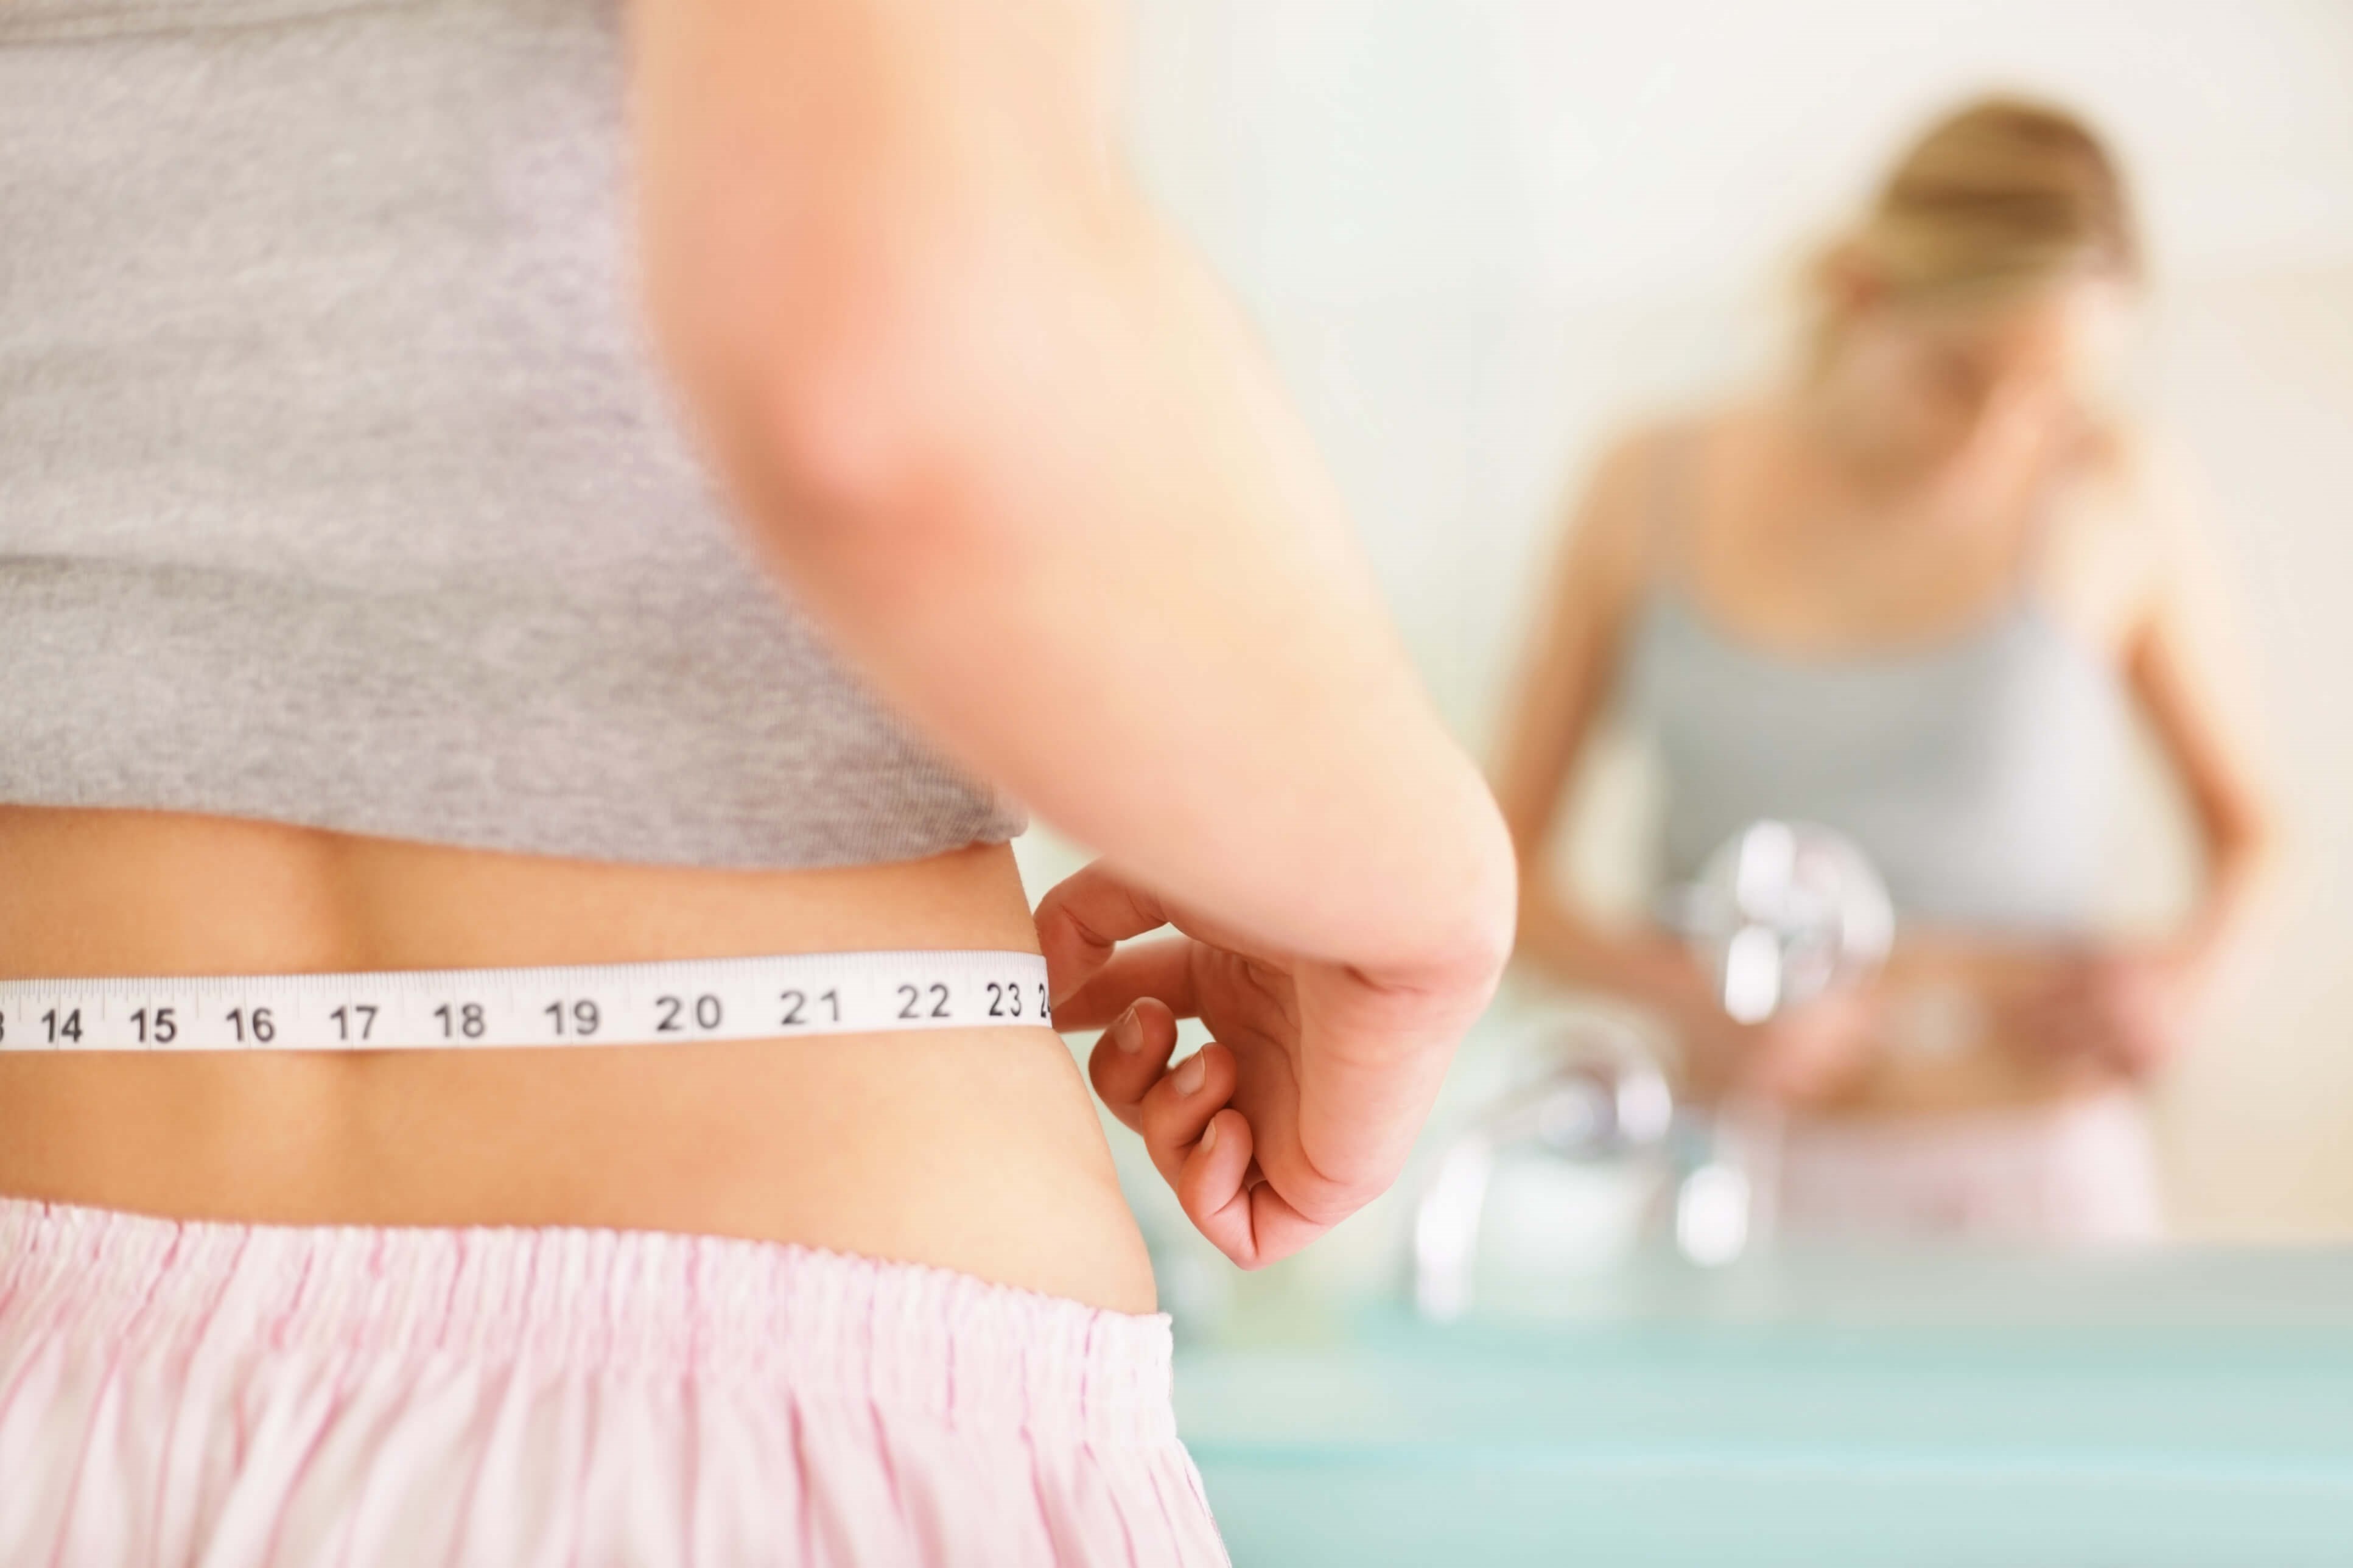 How Many Sizes Can You Lose With a Tummy Tuck?